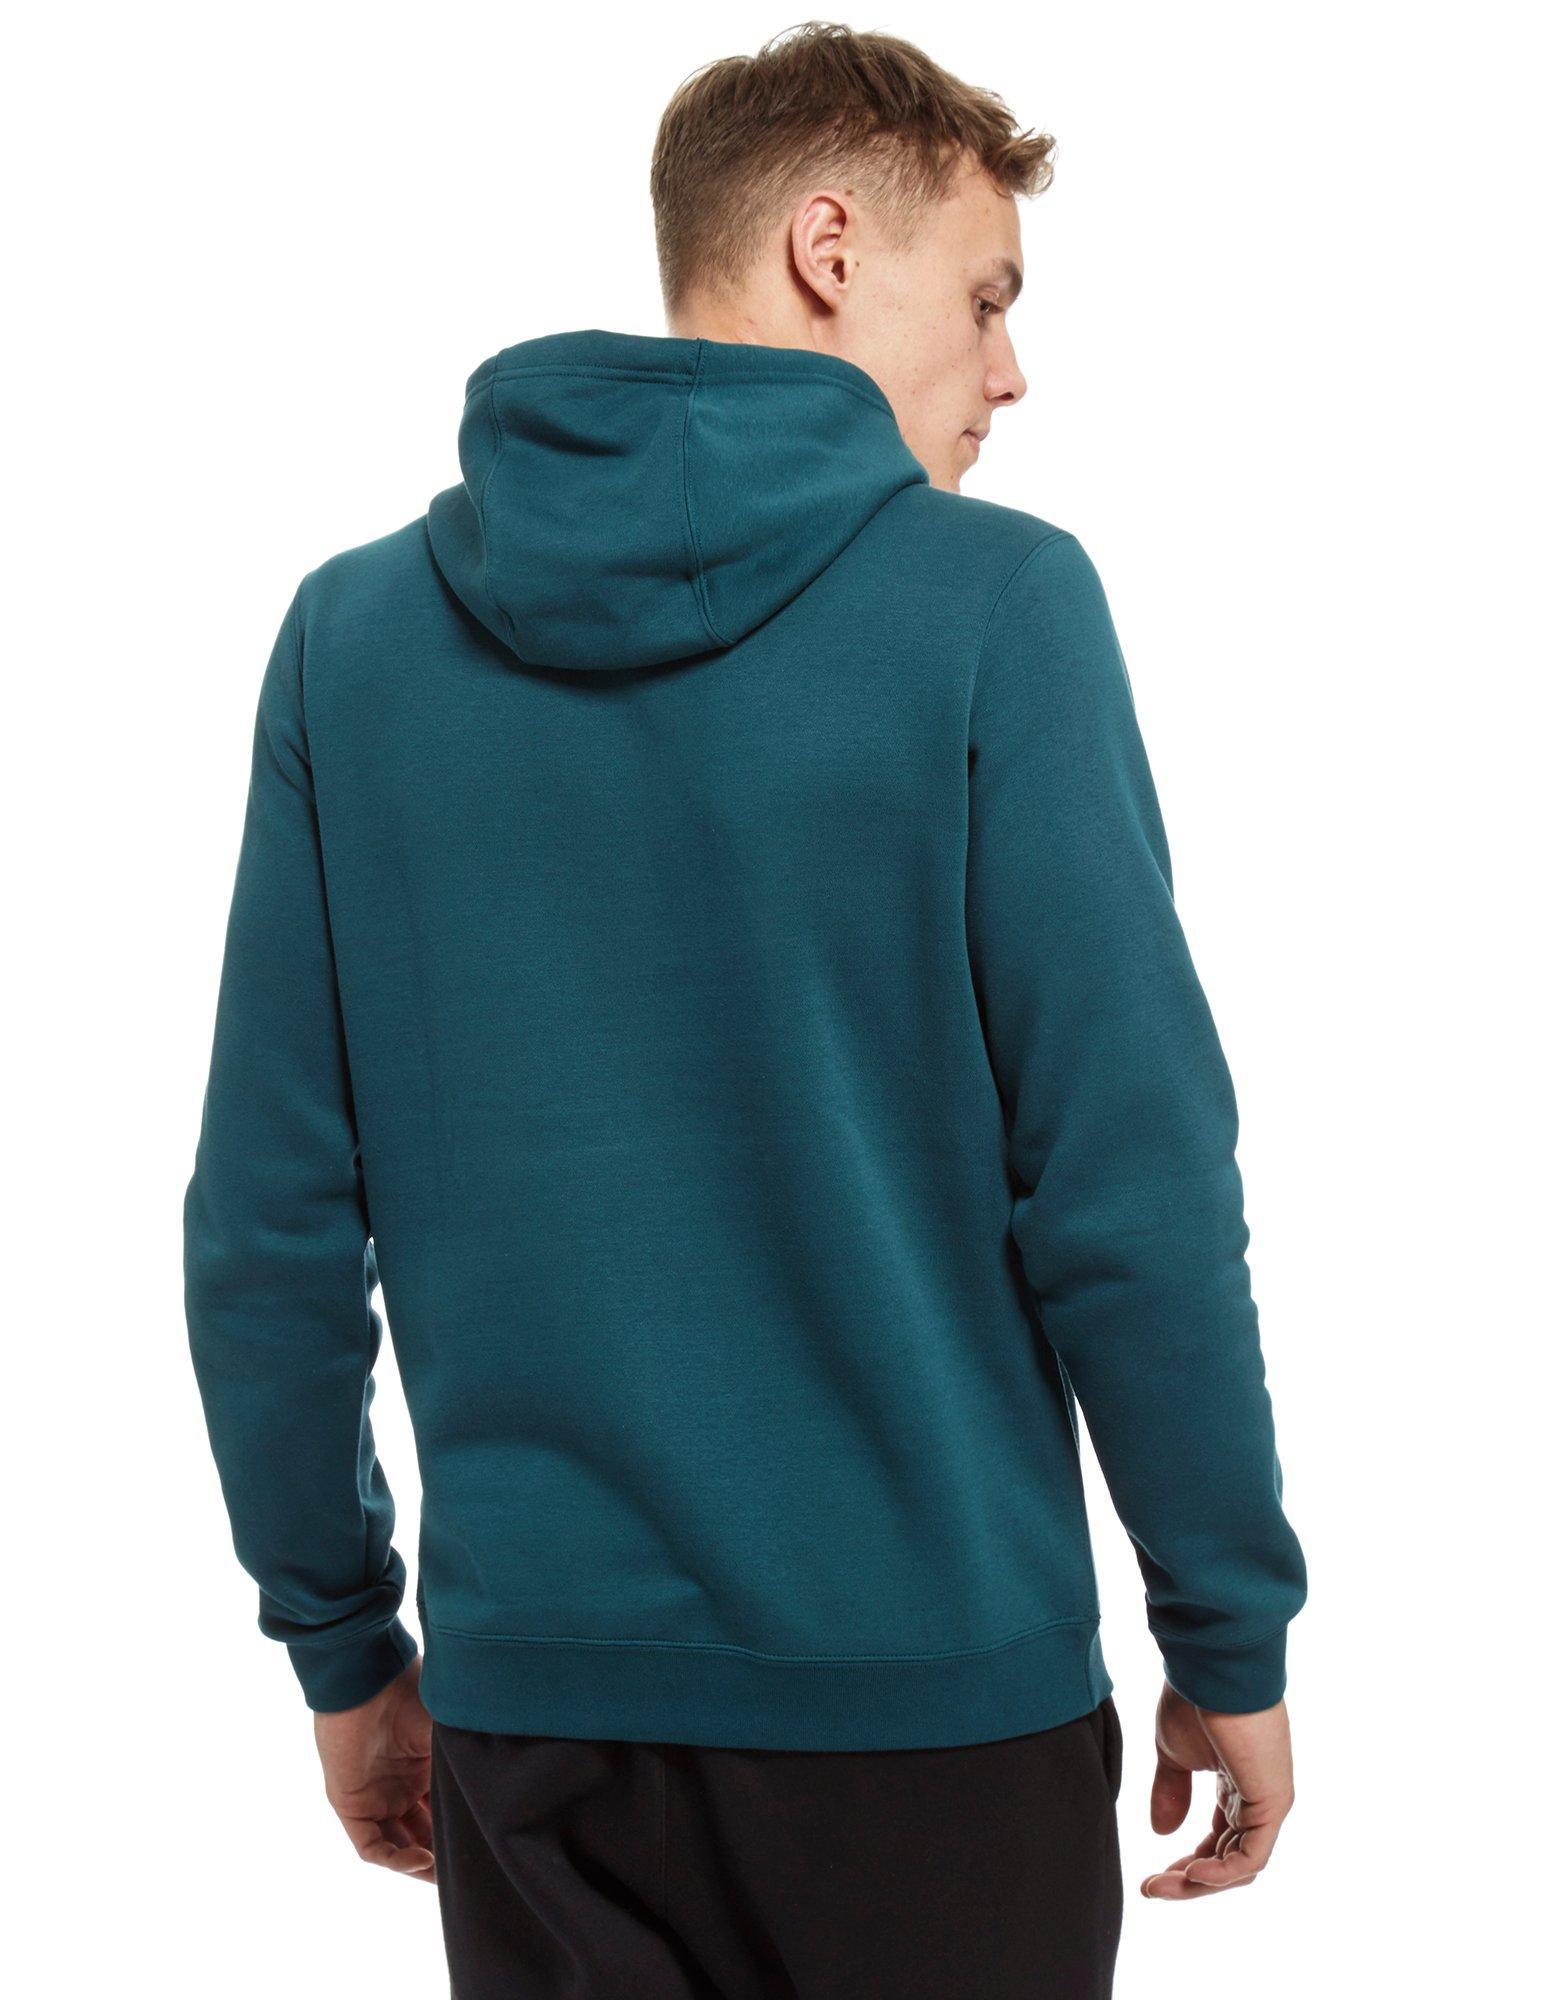 Nike Cotton Foundation Overhead Hoodie in Green/Blue (Blue) for Men - Lyst